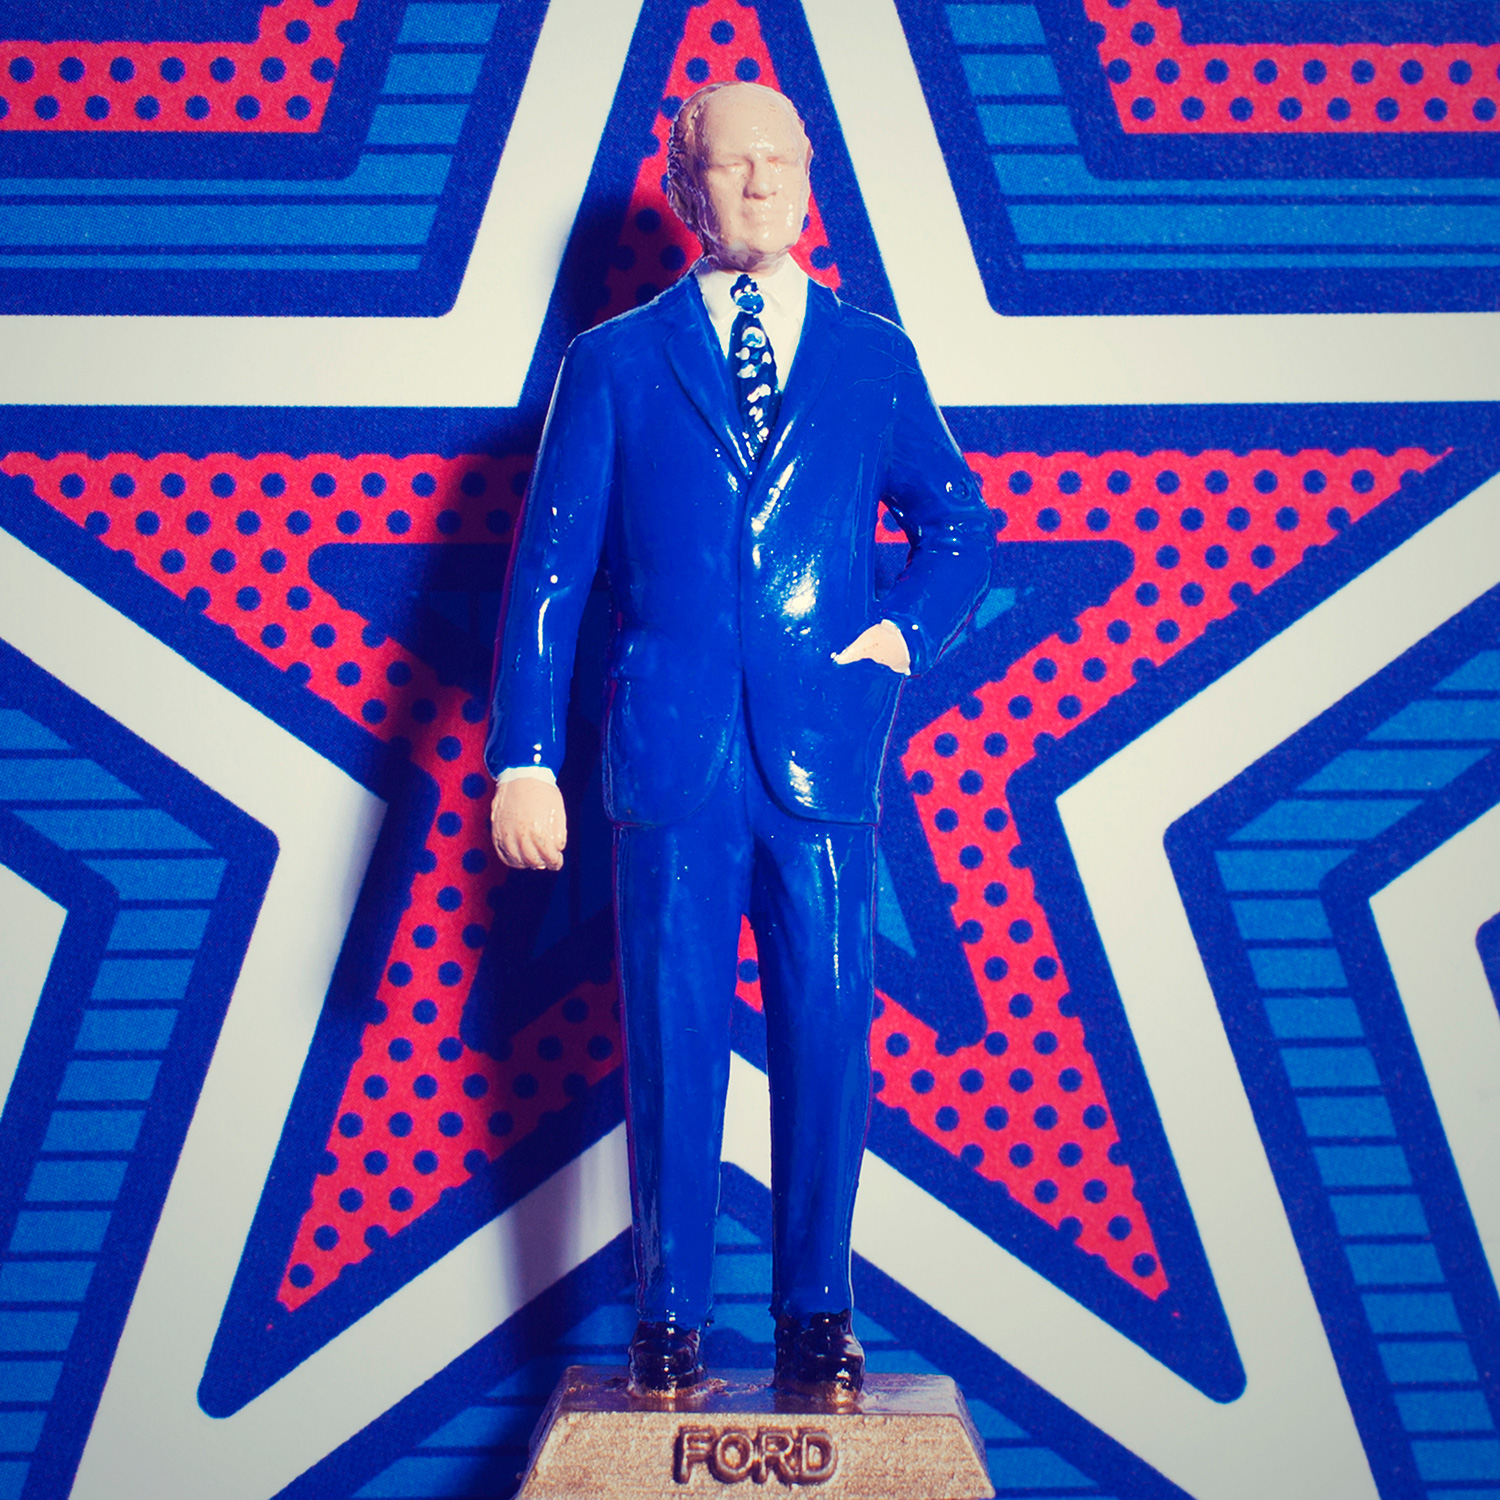 Gerald Ford: It's personal